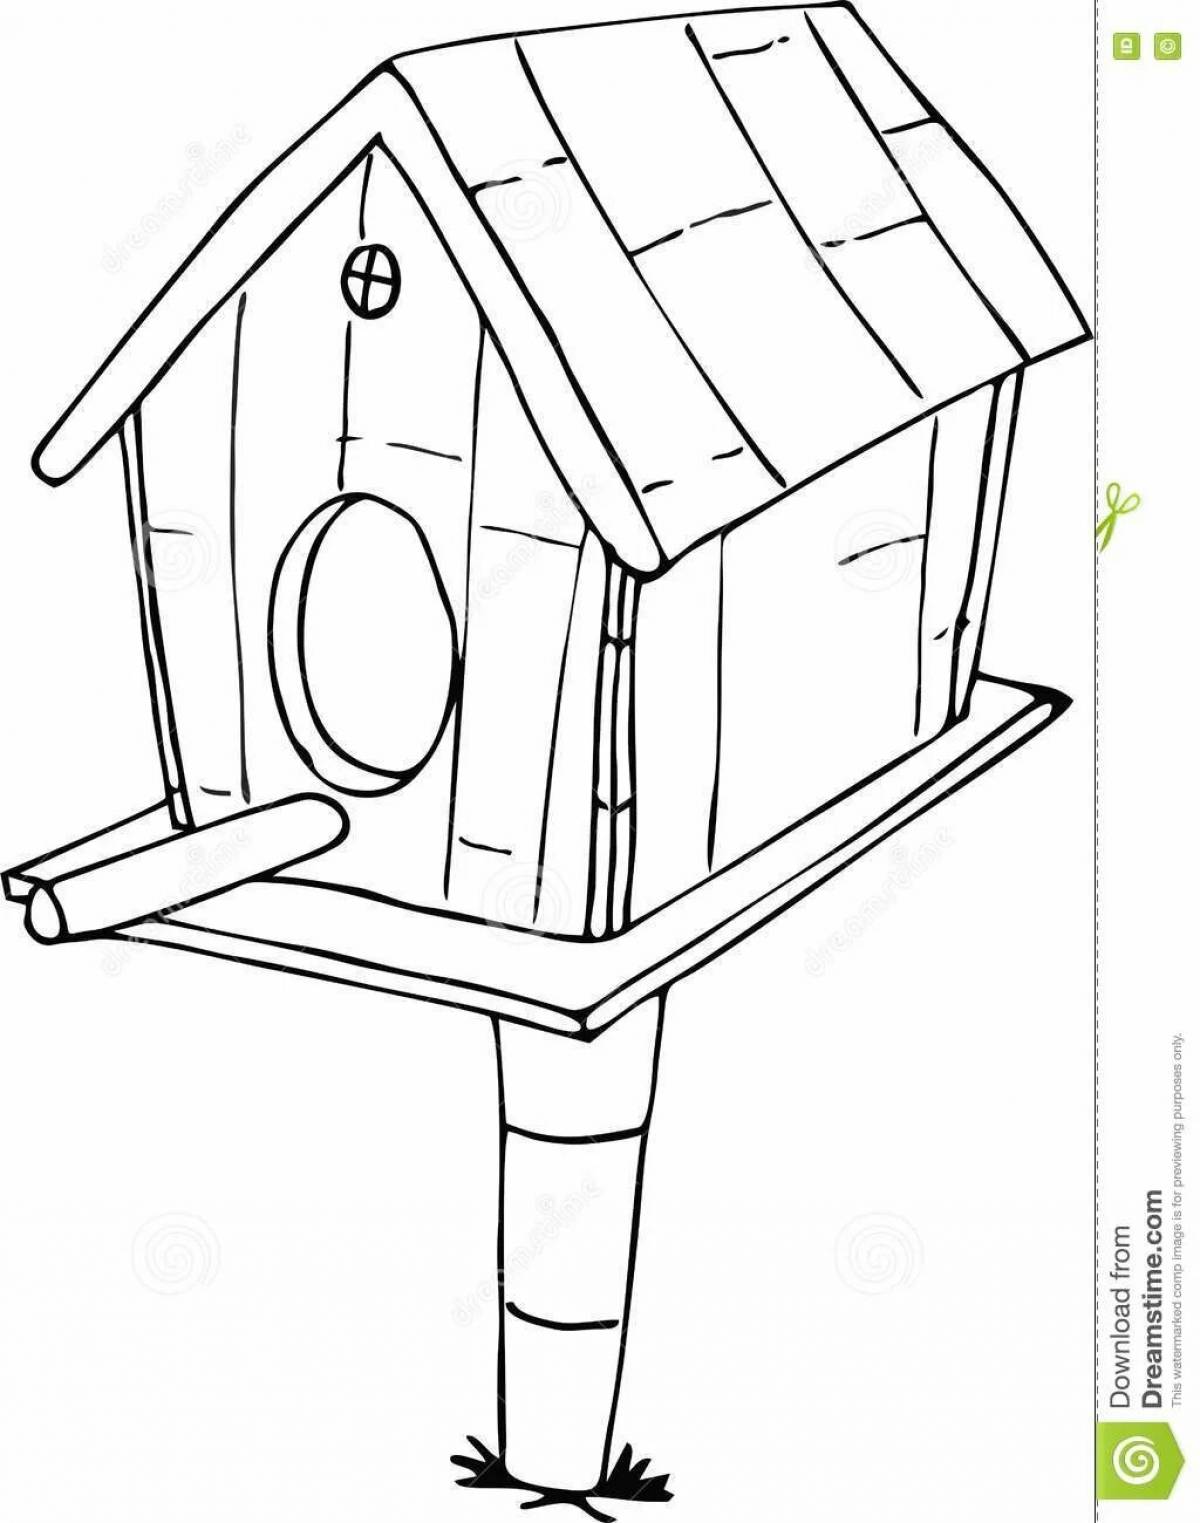 Glamorous birdhouse coloring book for preschoolers 3-4 years old